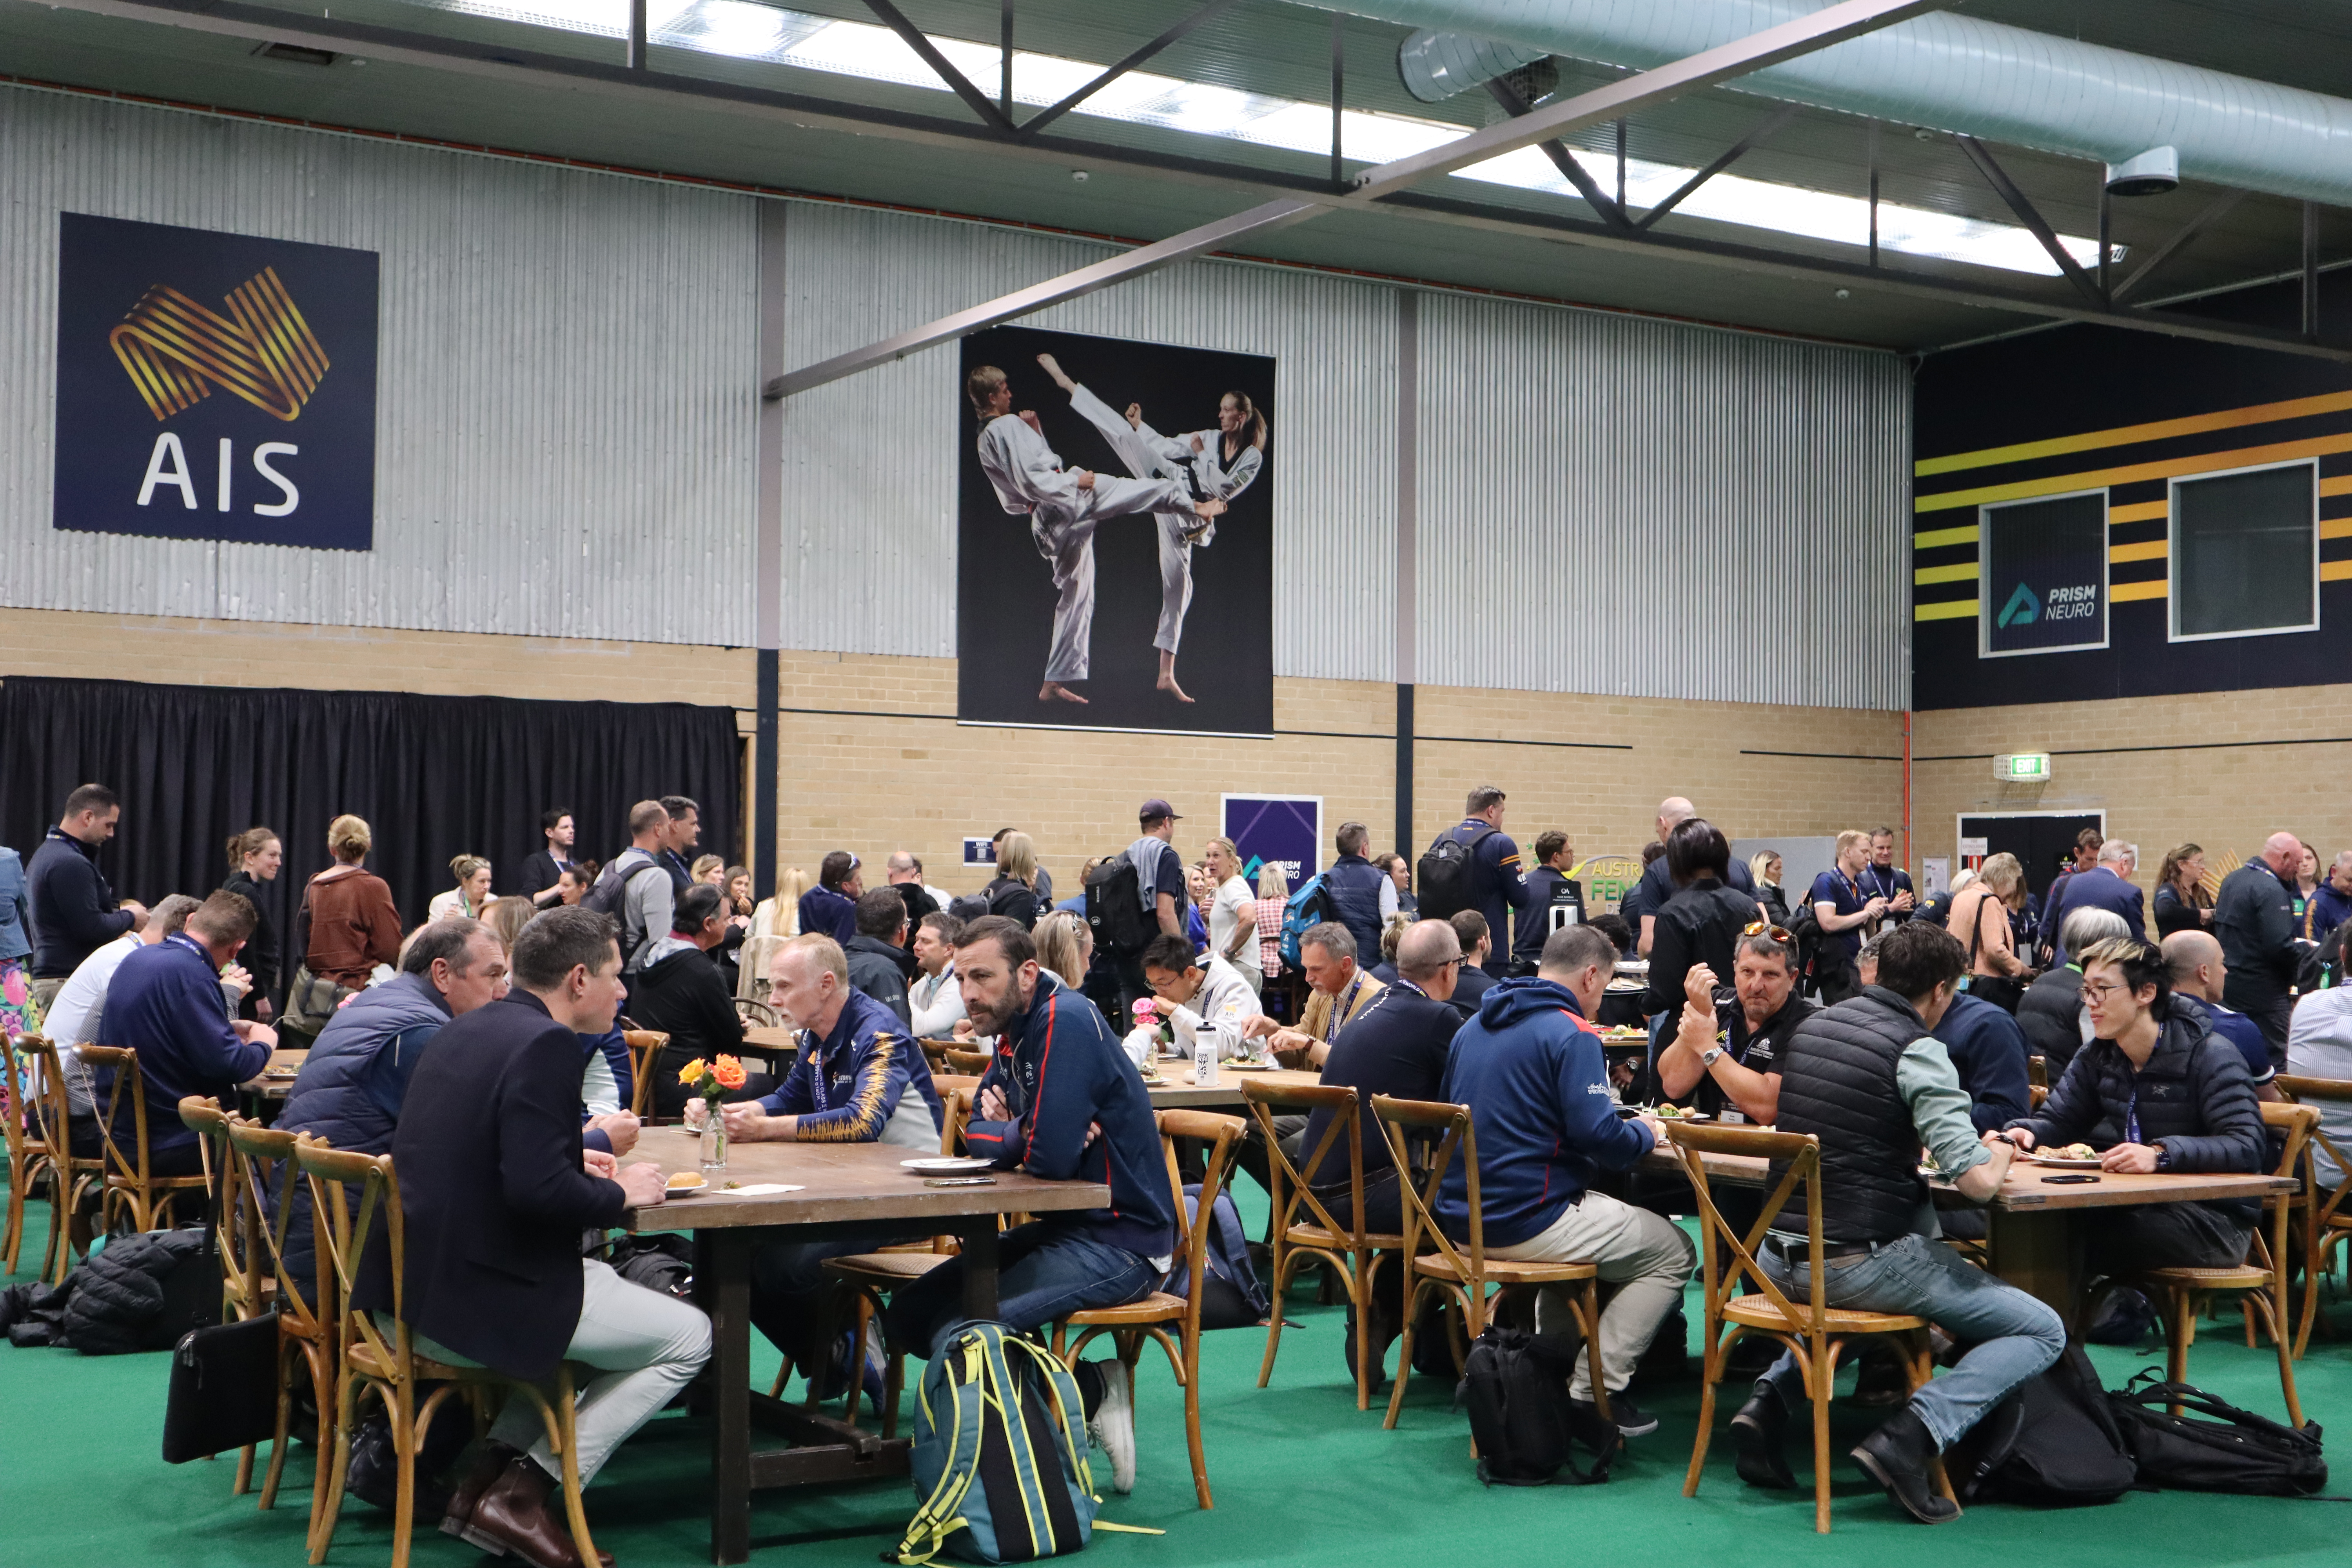 People seated at picnic-style tables inside the AIS Combat Centre